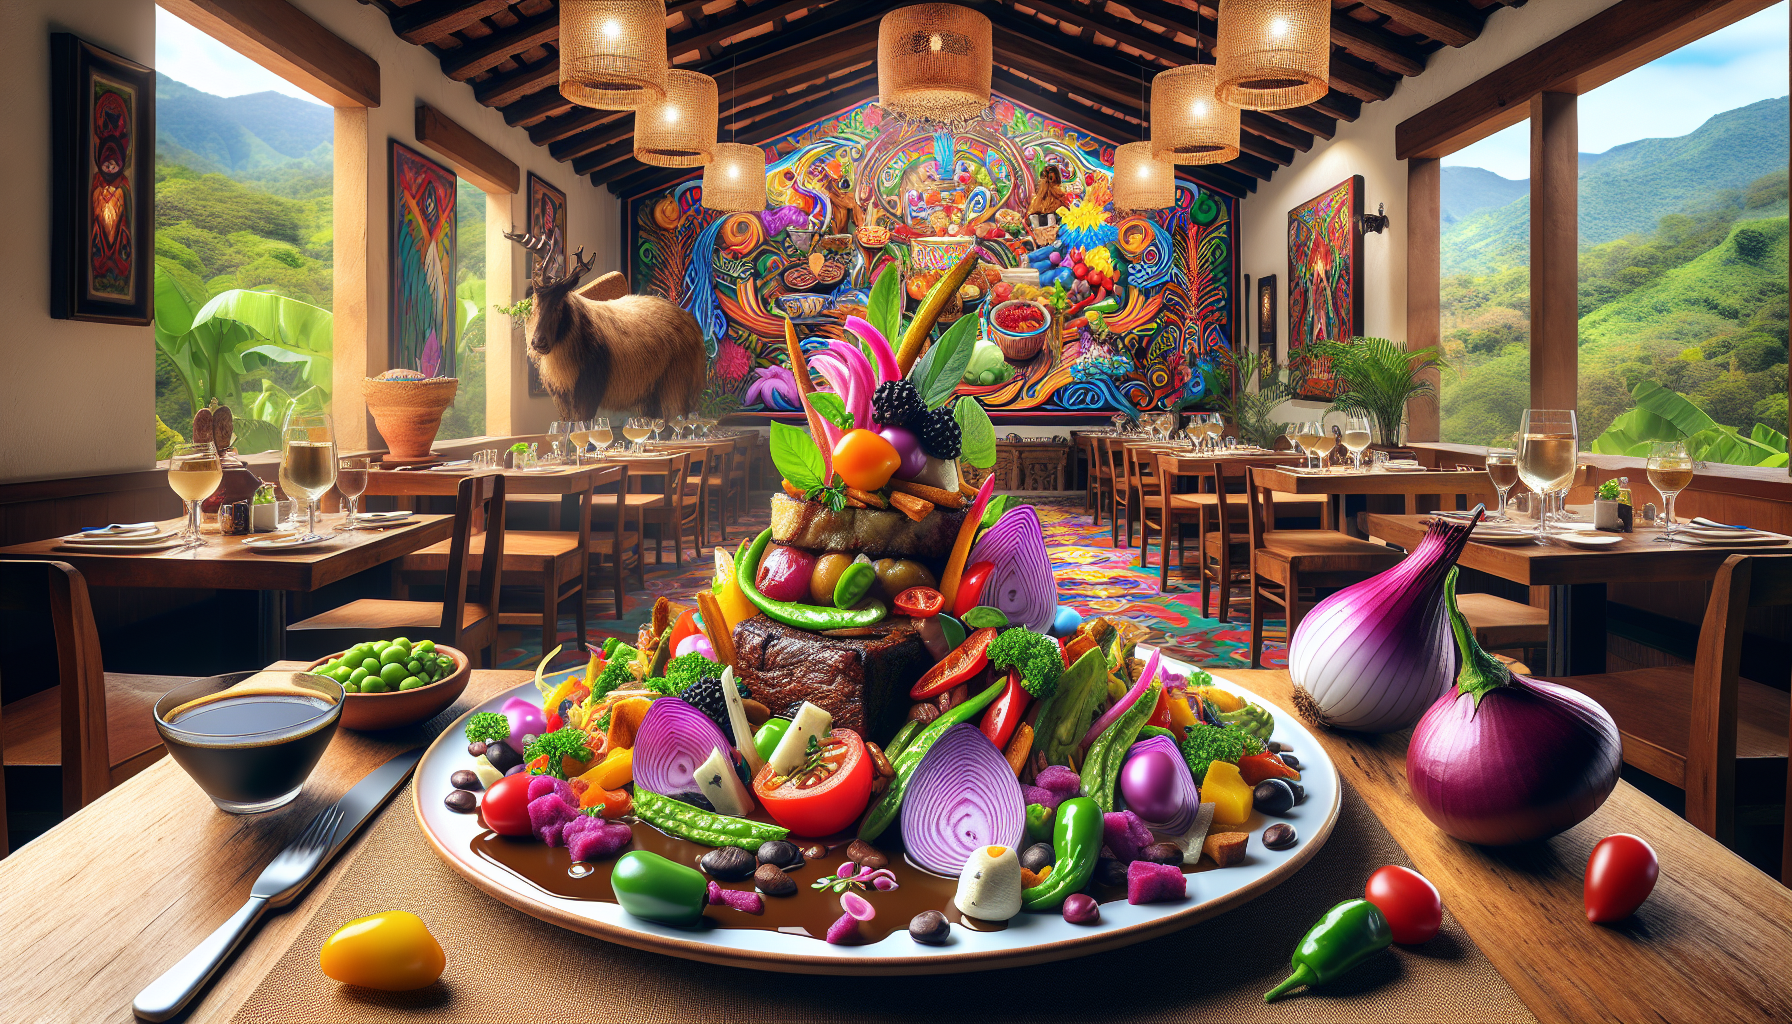 What Are The Best Places To Experience Nicaraguan Dishes With A Contemporary Twist?